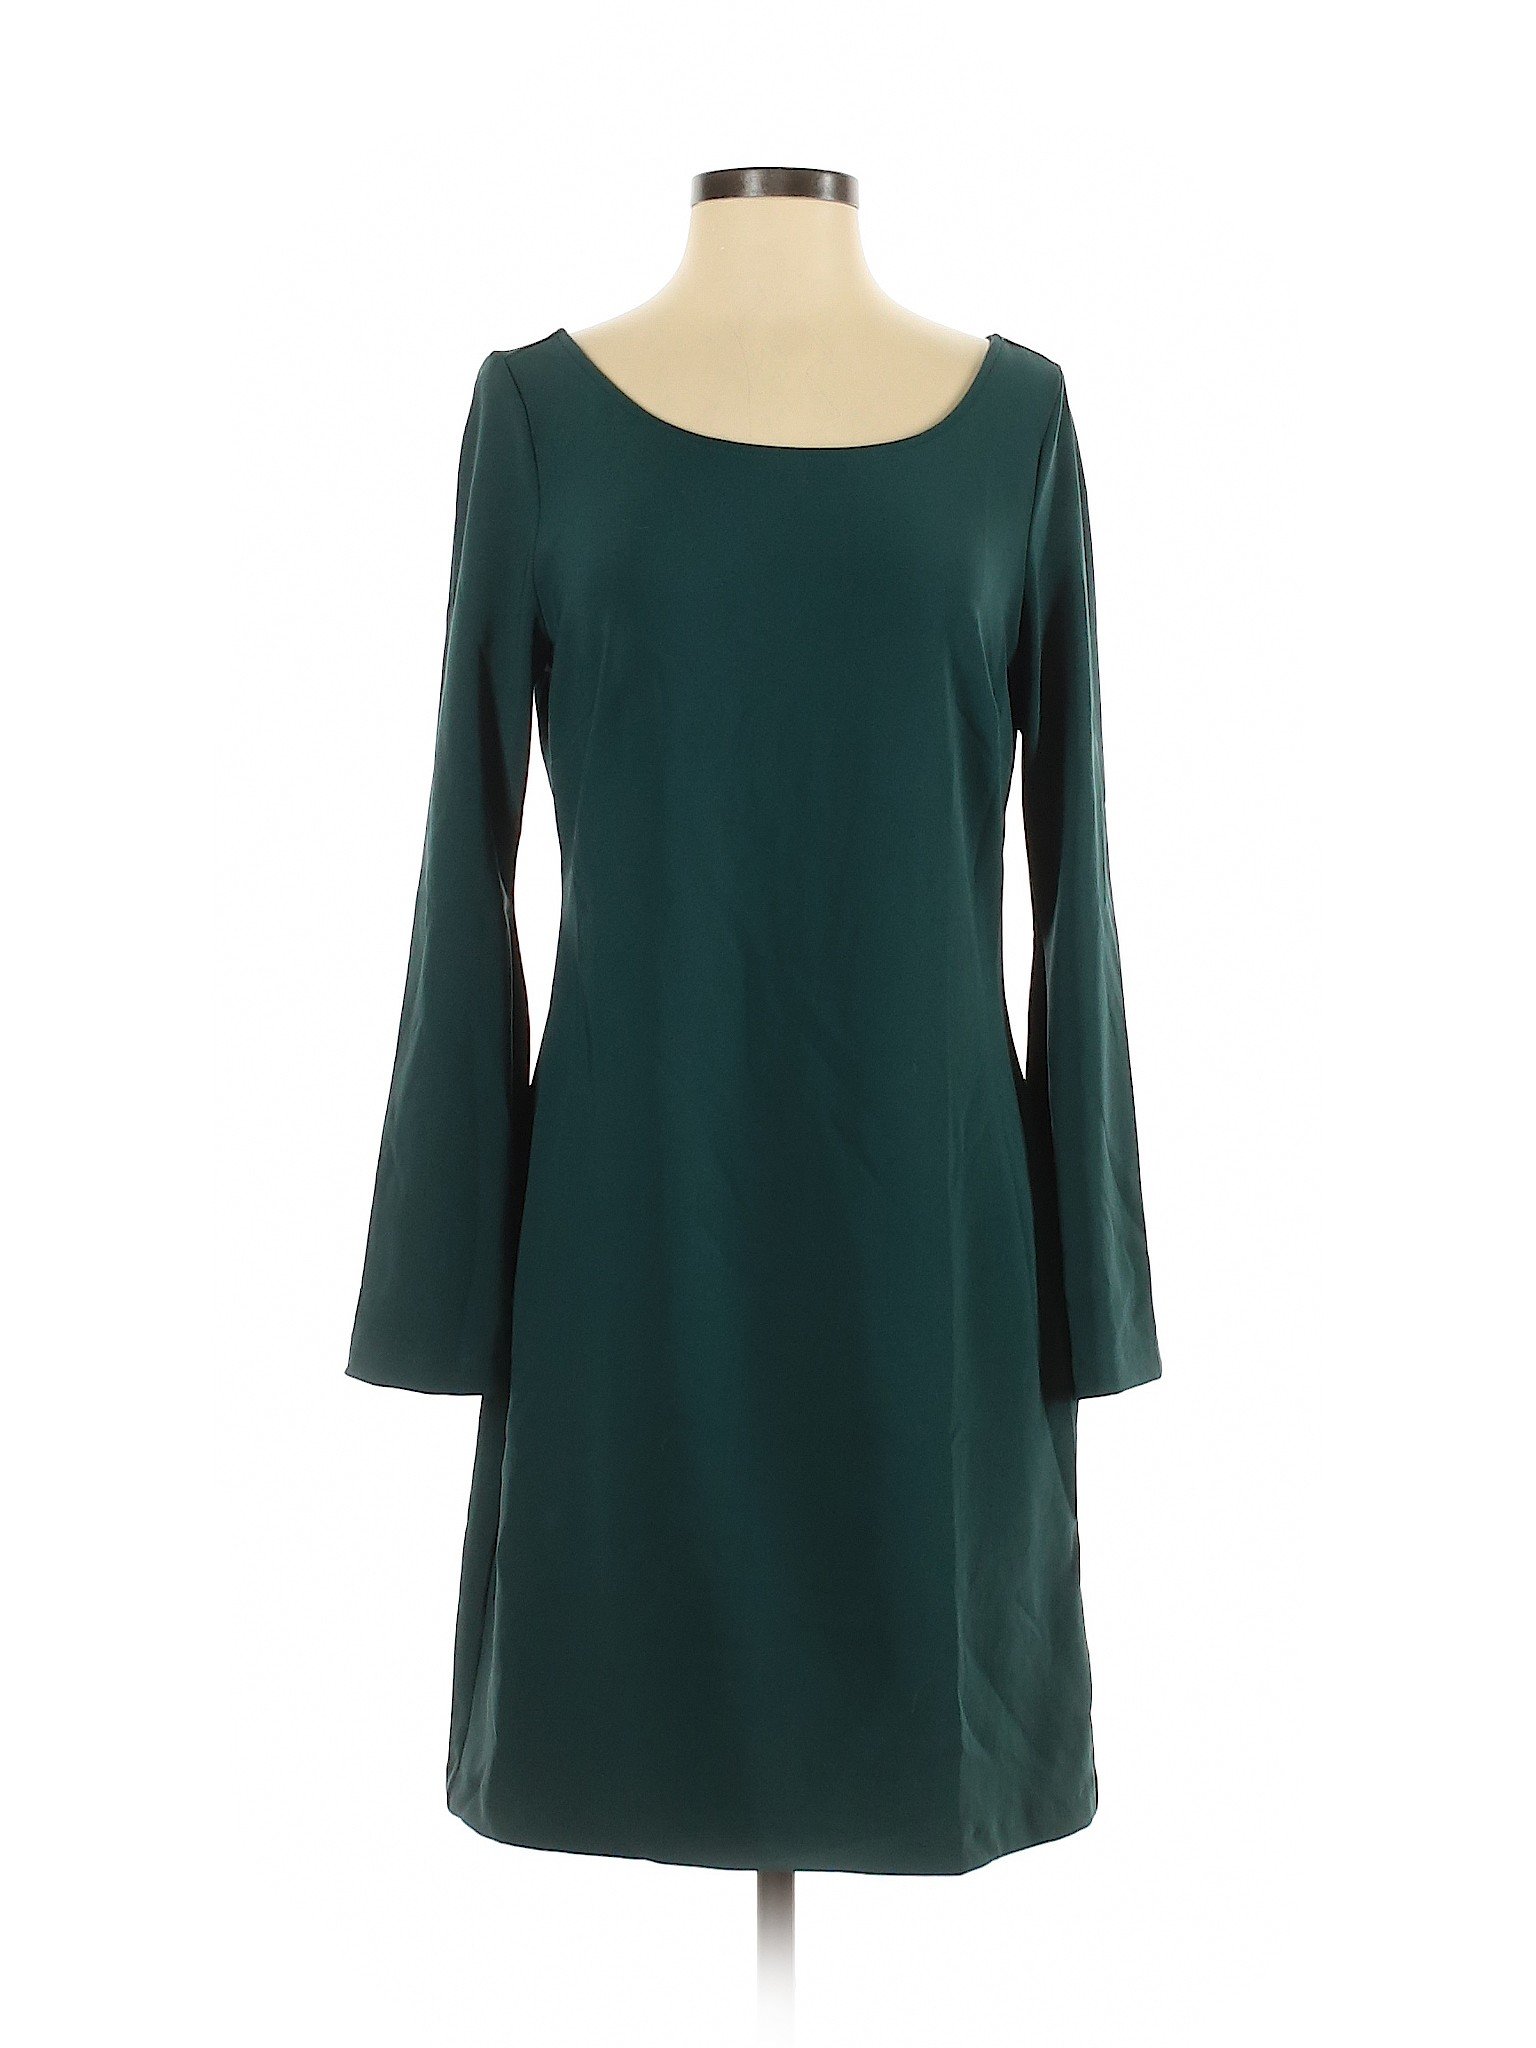 Boston Proper Solid Teal Green Casual Dress Size S - 80% off | thredUP